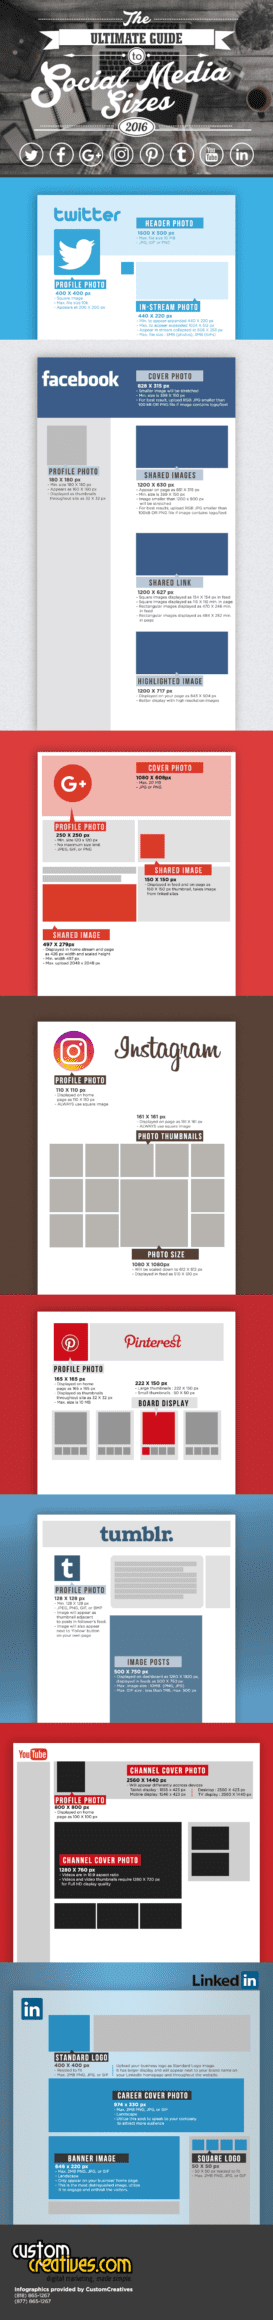 ultimate-guide-to-social-media-sizes-custom-creatives